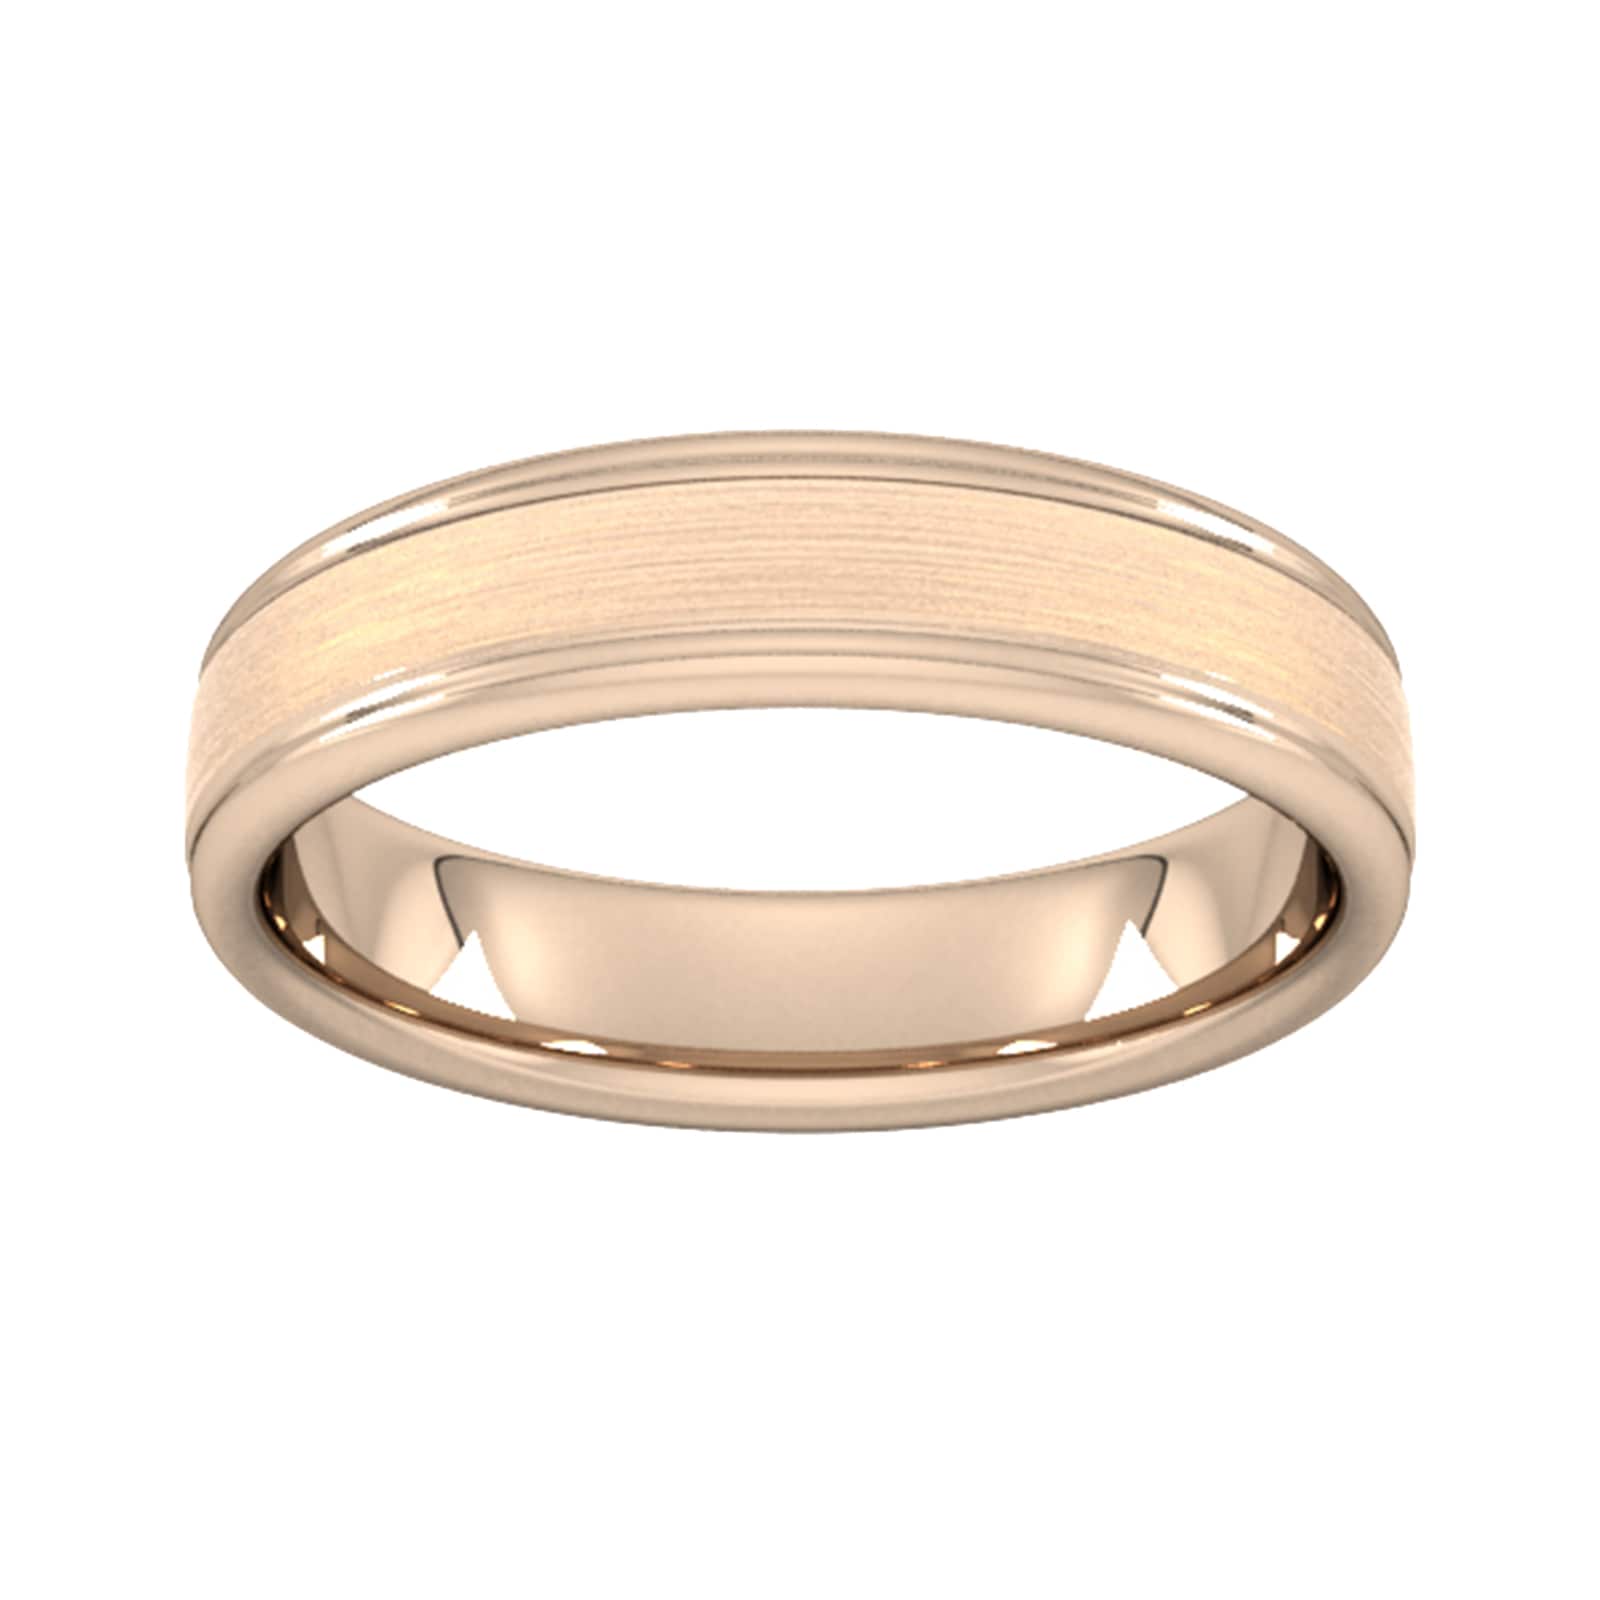 5mm Slight Court Standard Matt Centre With Grooves Wedding Ring In 18 Carat Rose Gold - Ring Size H